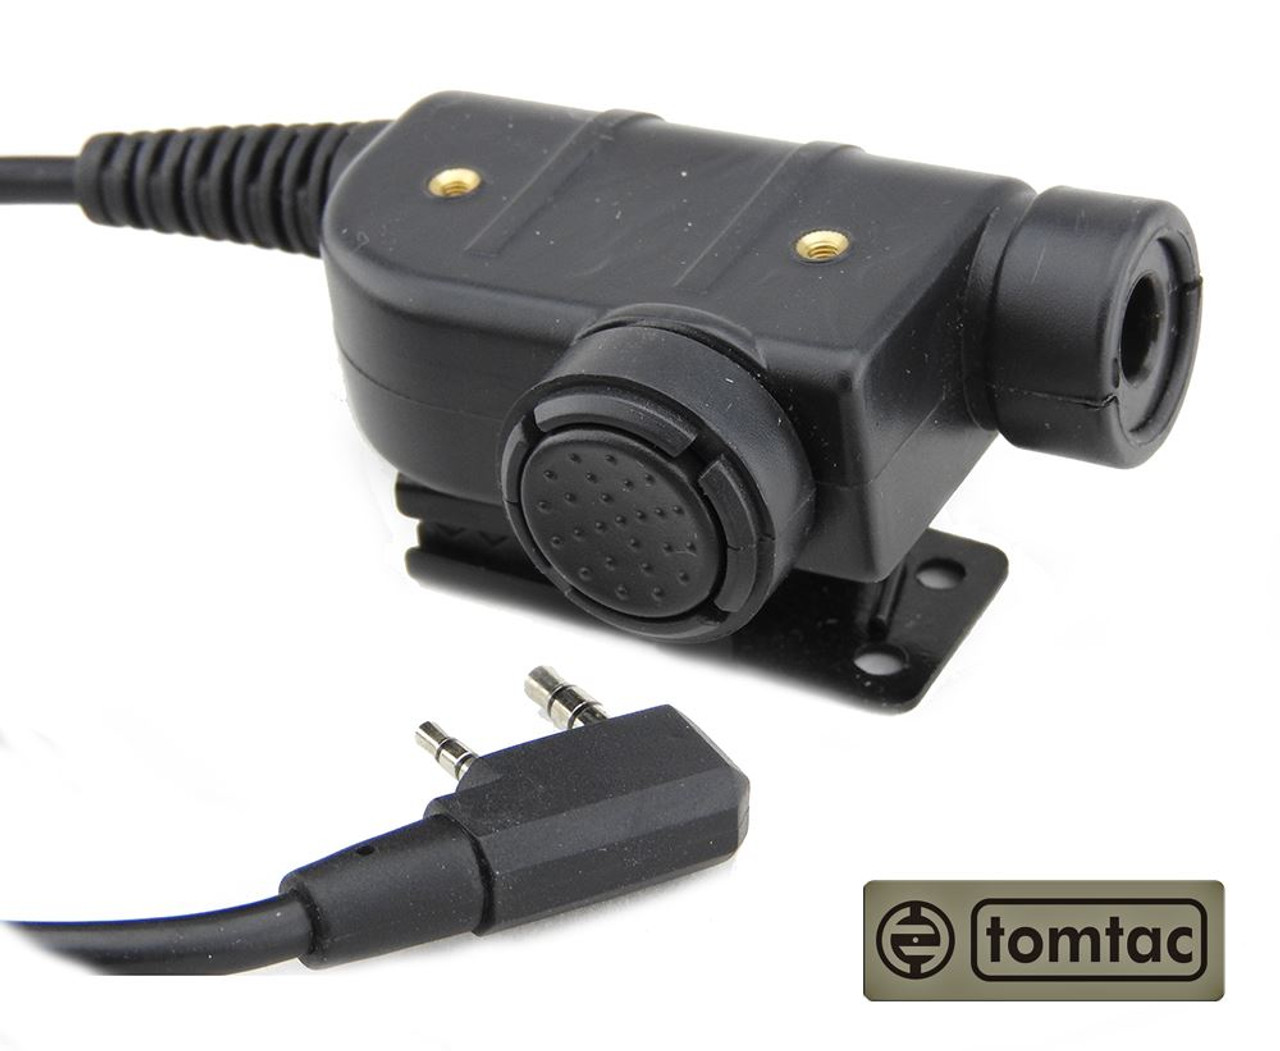 Tomtac Silynx Style Ptt Black 2 Way Radio Switch Sordins Comtac Kenwood 2 Pin